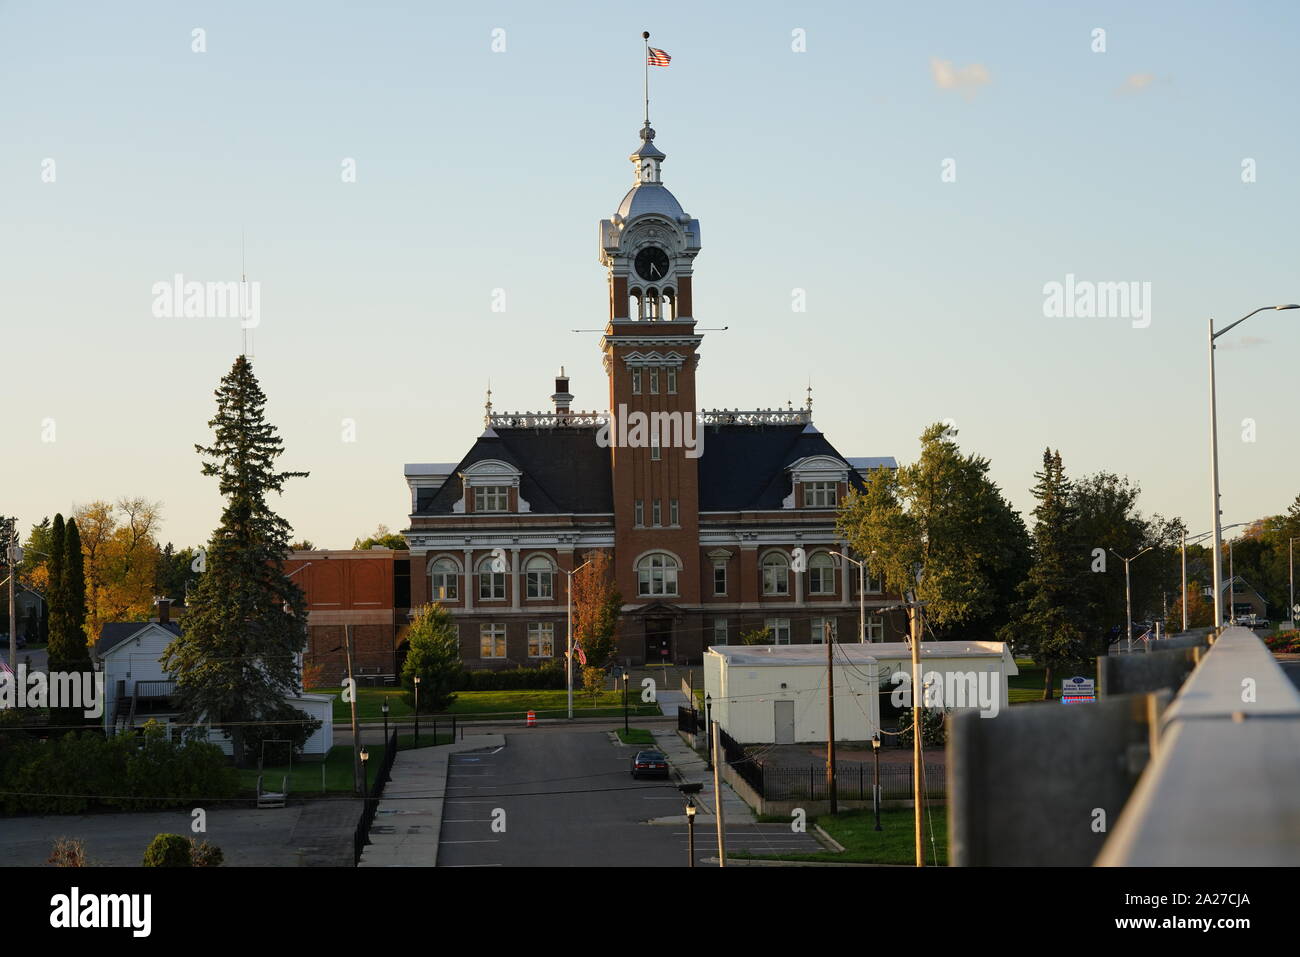 Lincoln County Courthouse clock tower. Built-in 1903 towers over Merrill Wisconsin city. Stock Photo